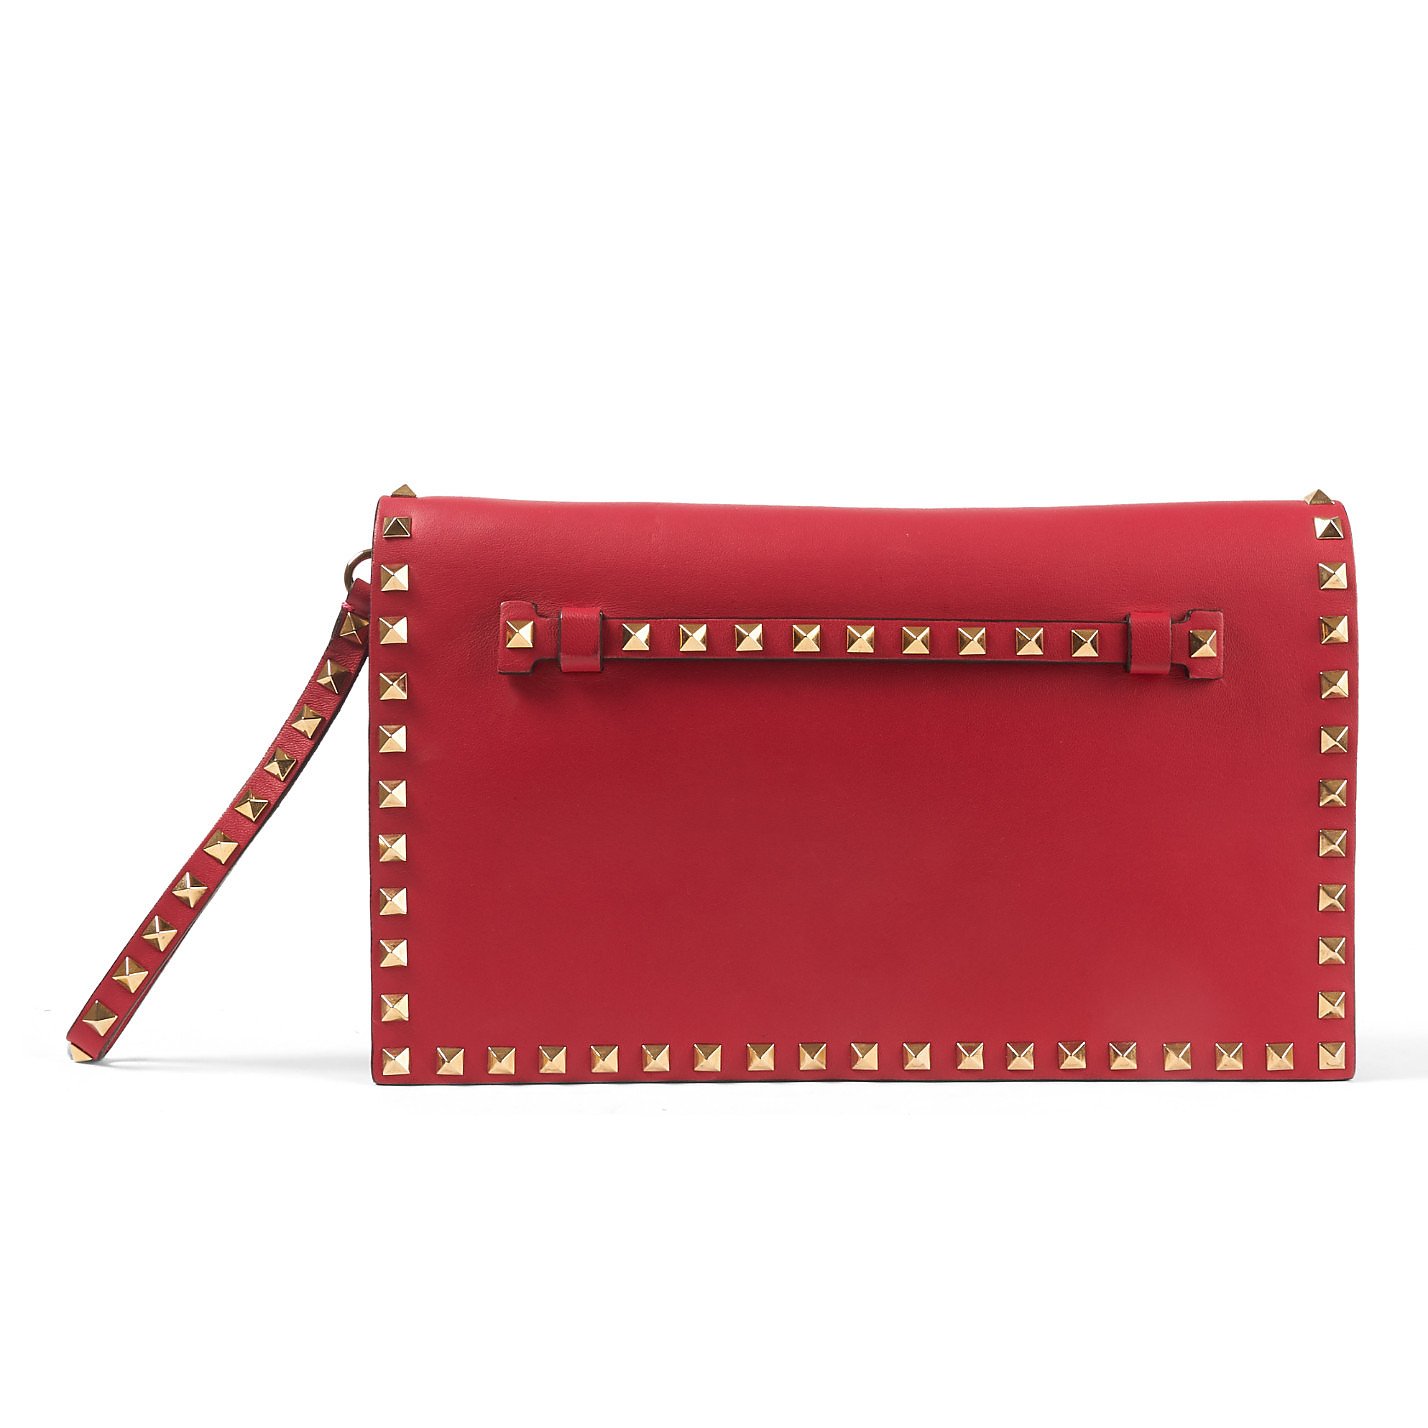 Valentino Studded Leather Clutch Bag